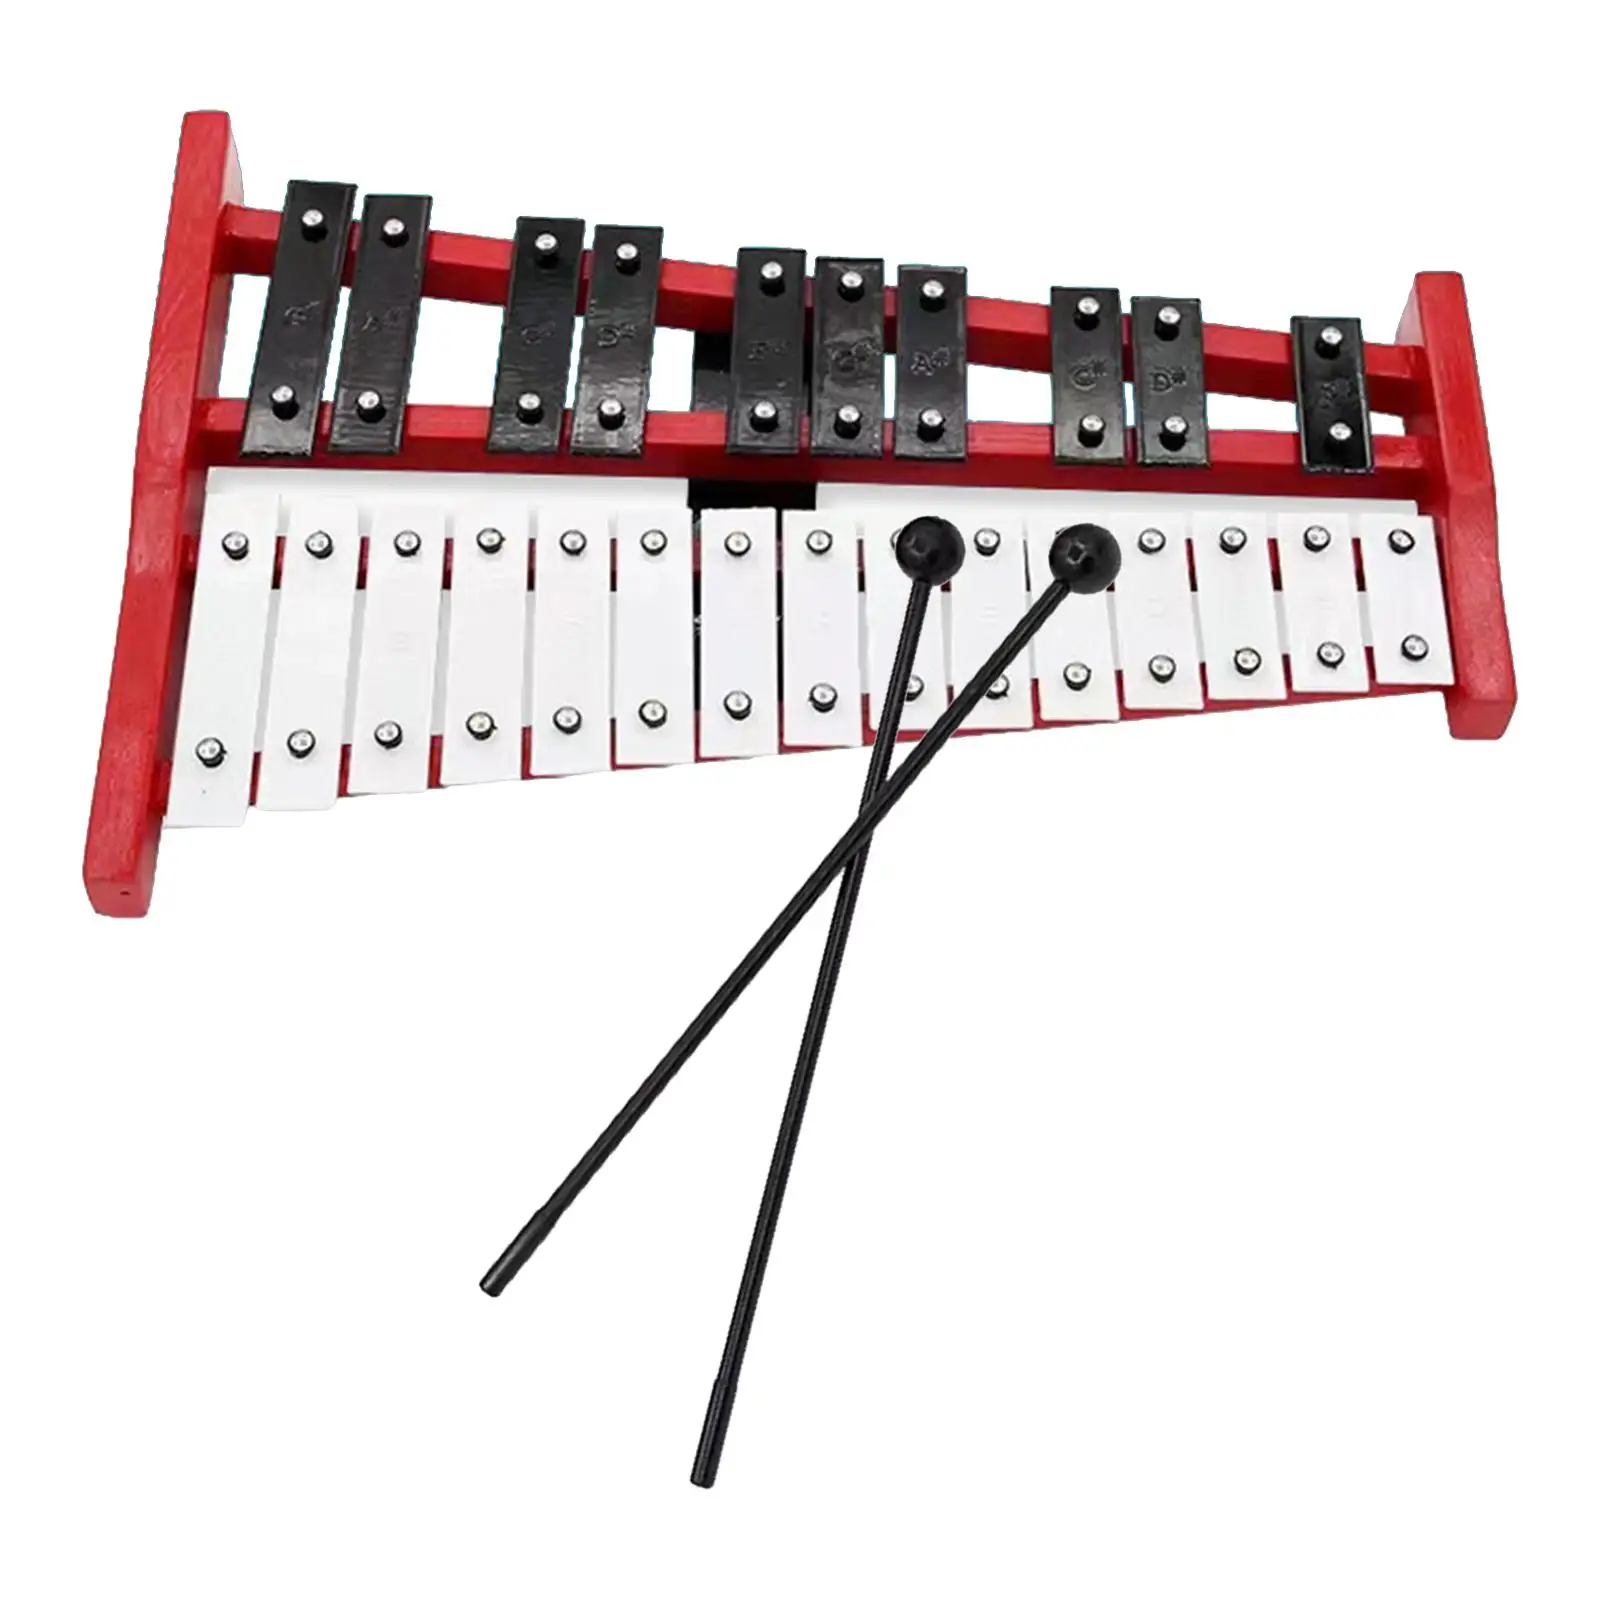 Xylophone Musical Toy 25 Note for Concert Family Sessions School Orchestras